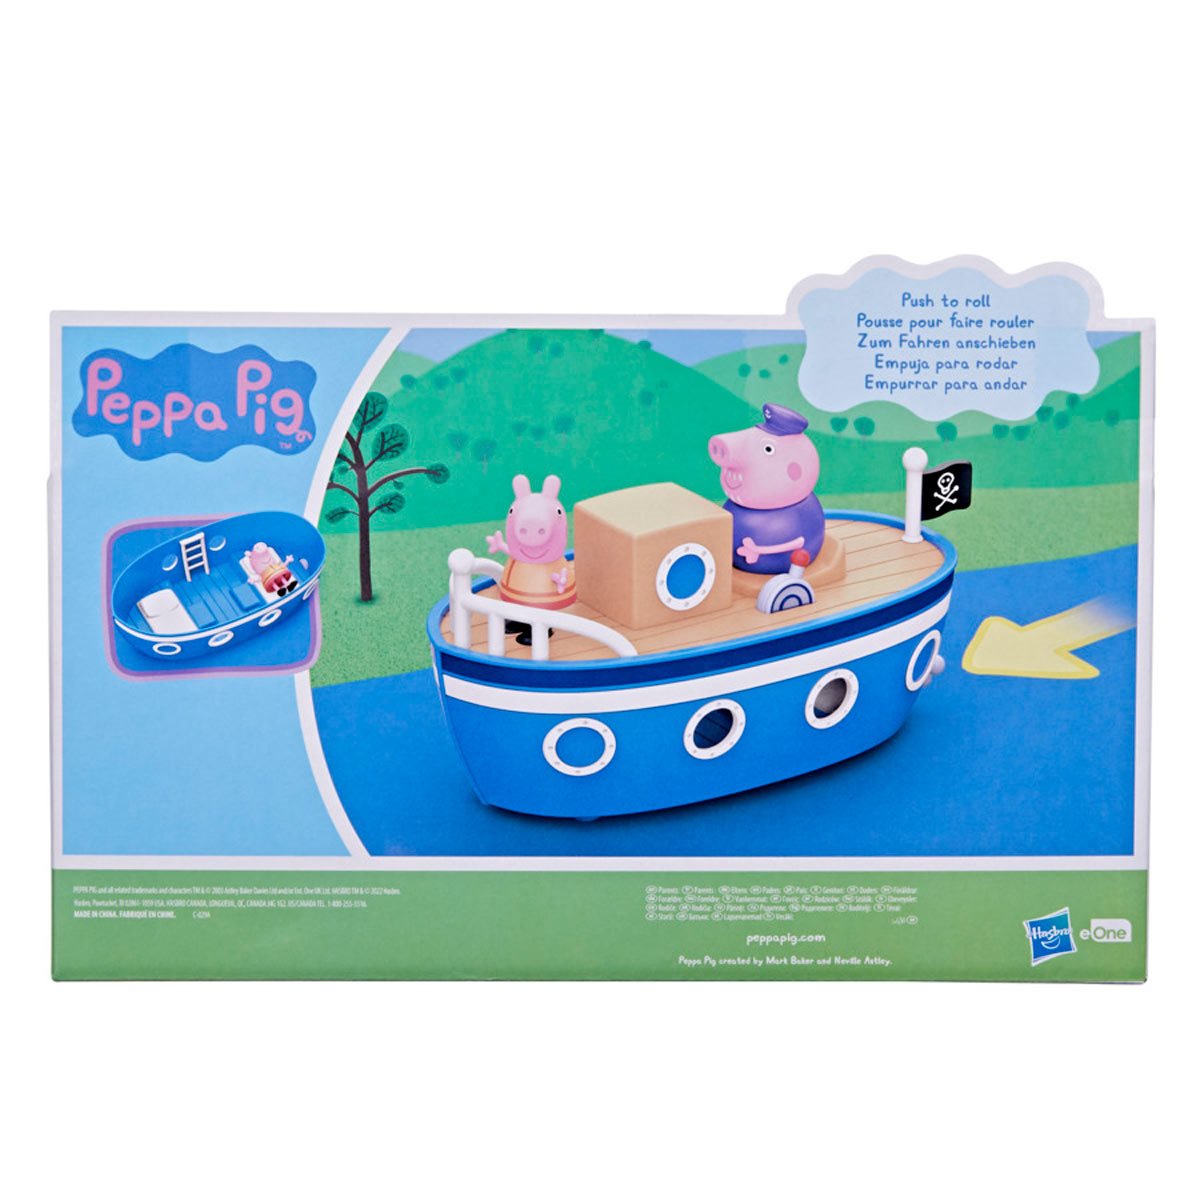 Hasbro Makes Waves with Peppa Pig Cruise Ship Playset - The Toy Insider